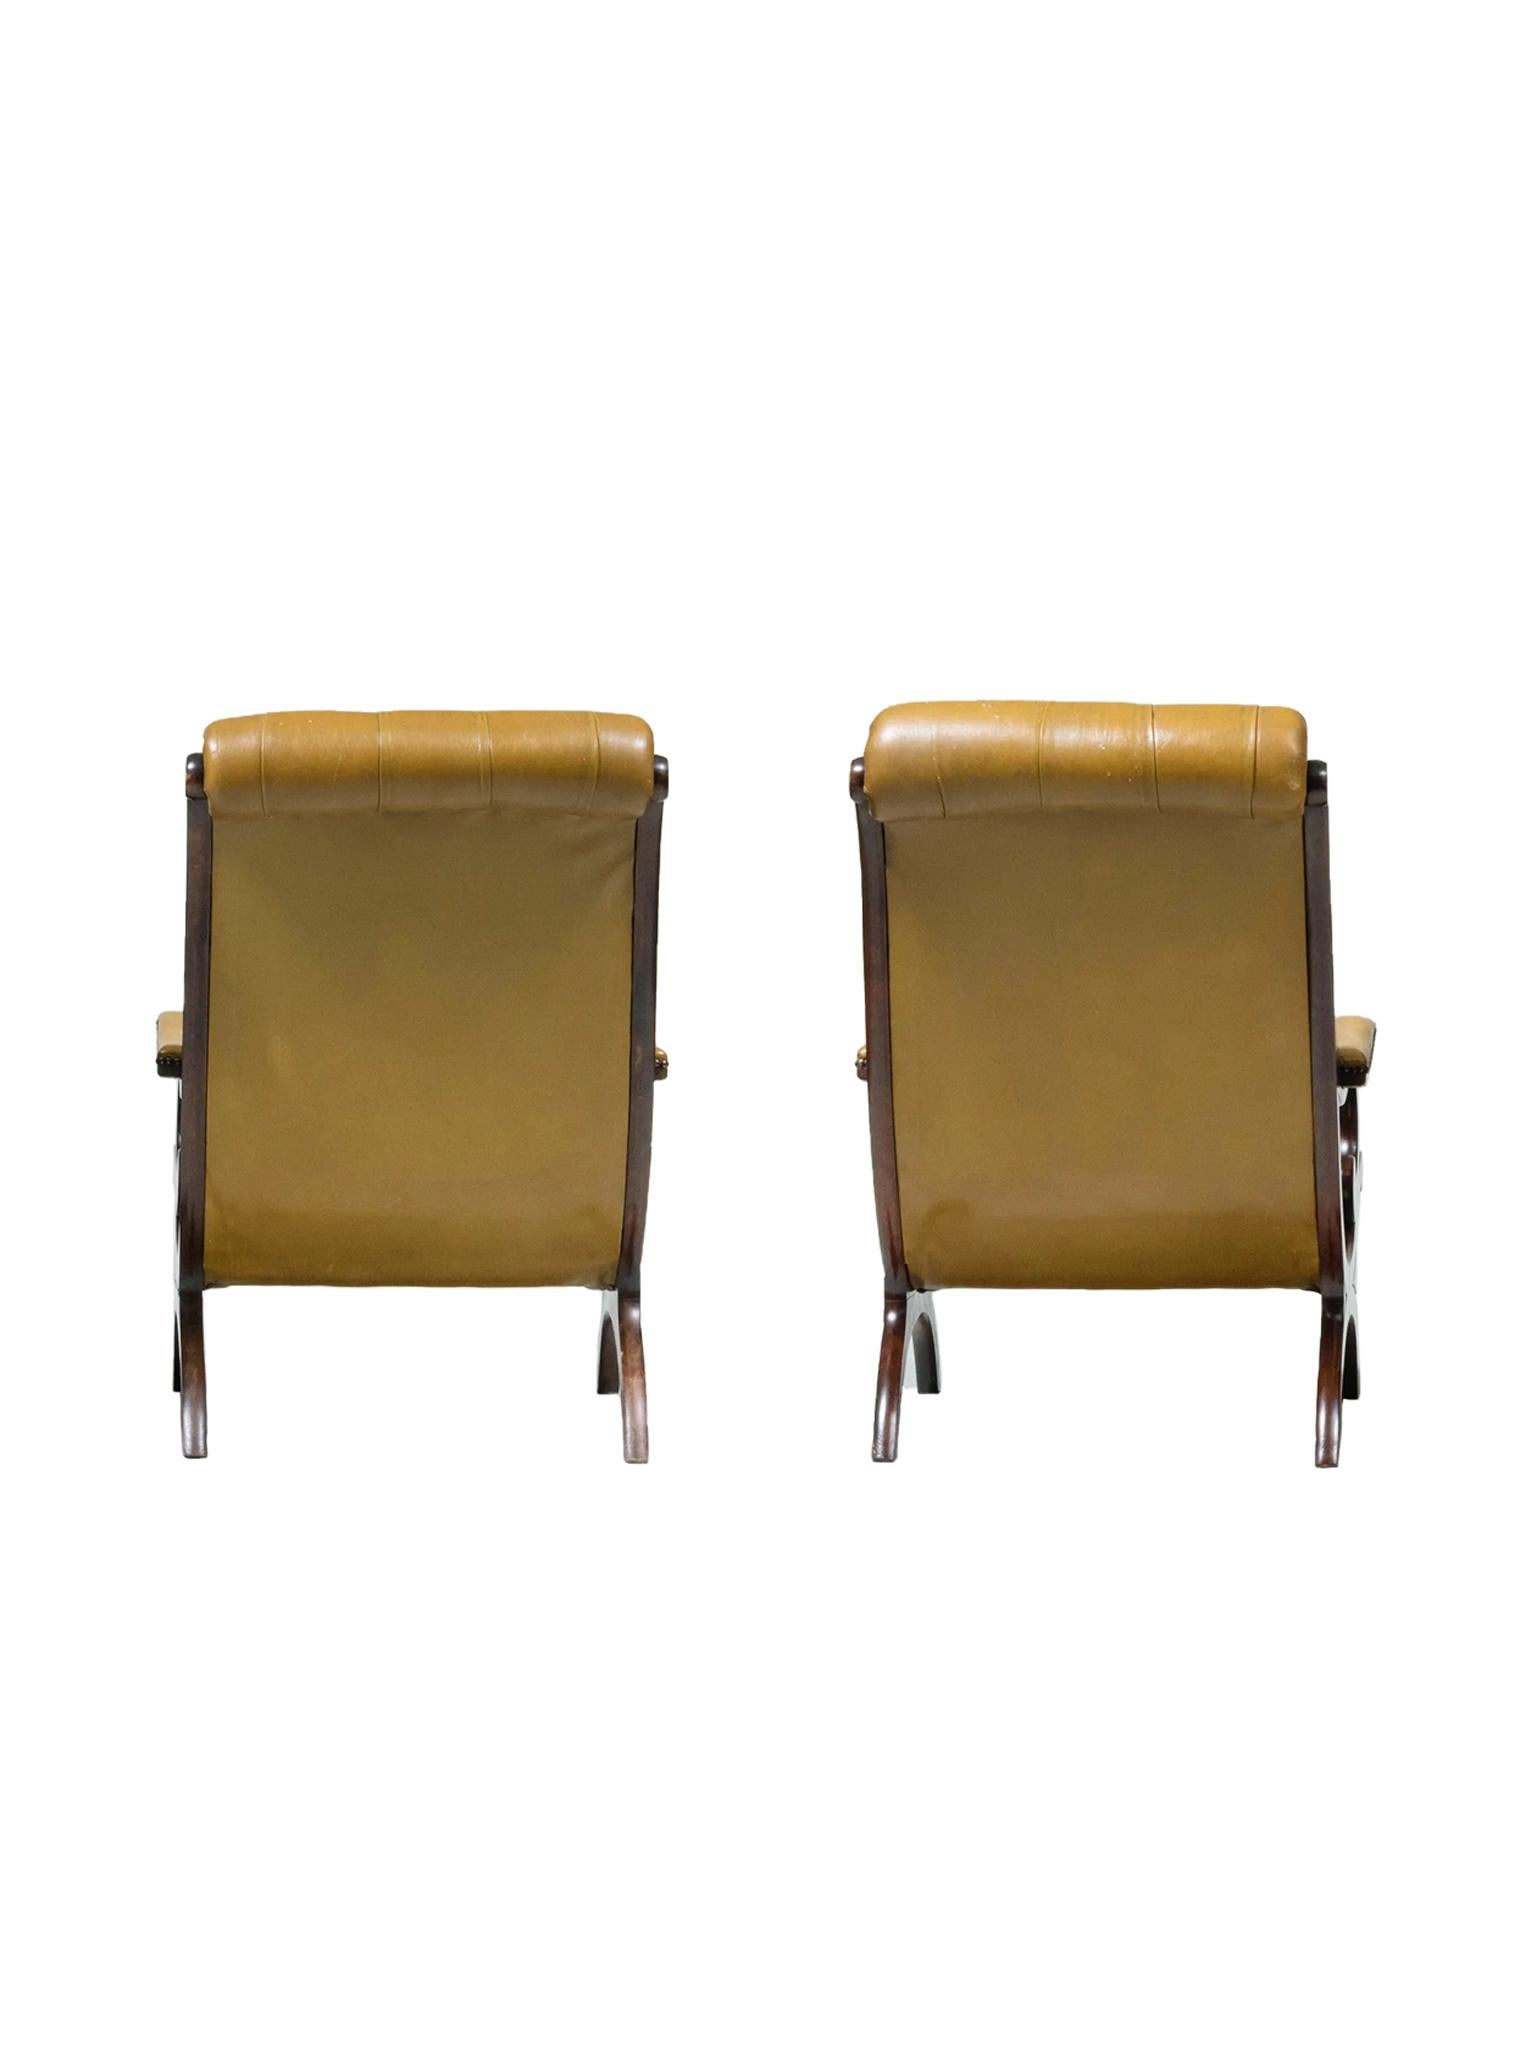 Metal 20th Century Regency Style Leather & Mahogany Armchairs, Pair For Sale